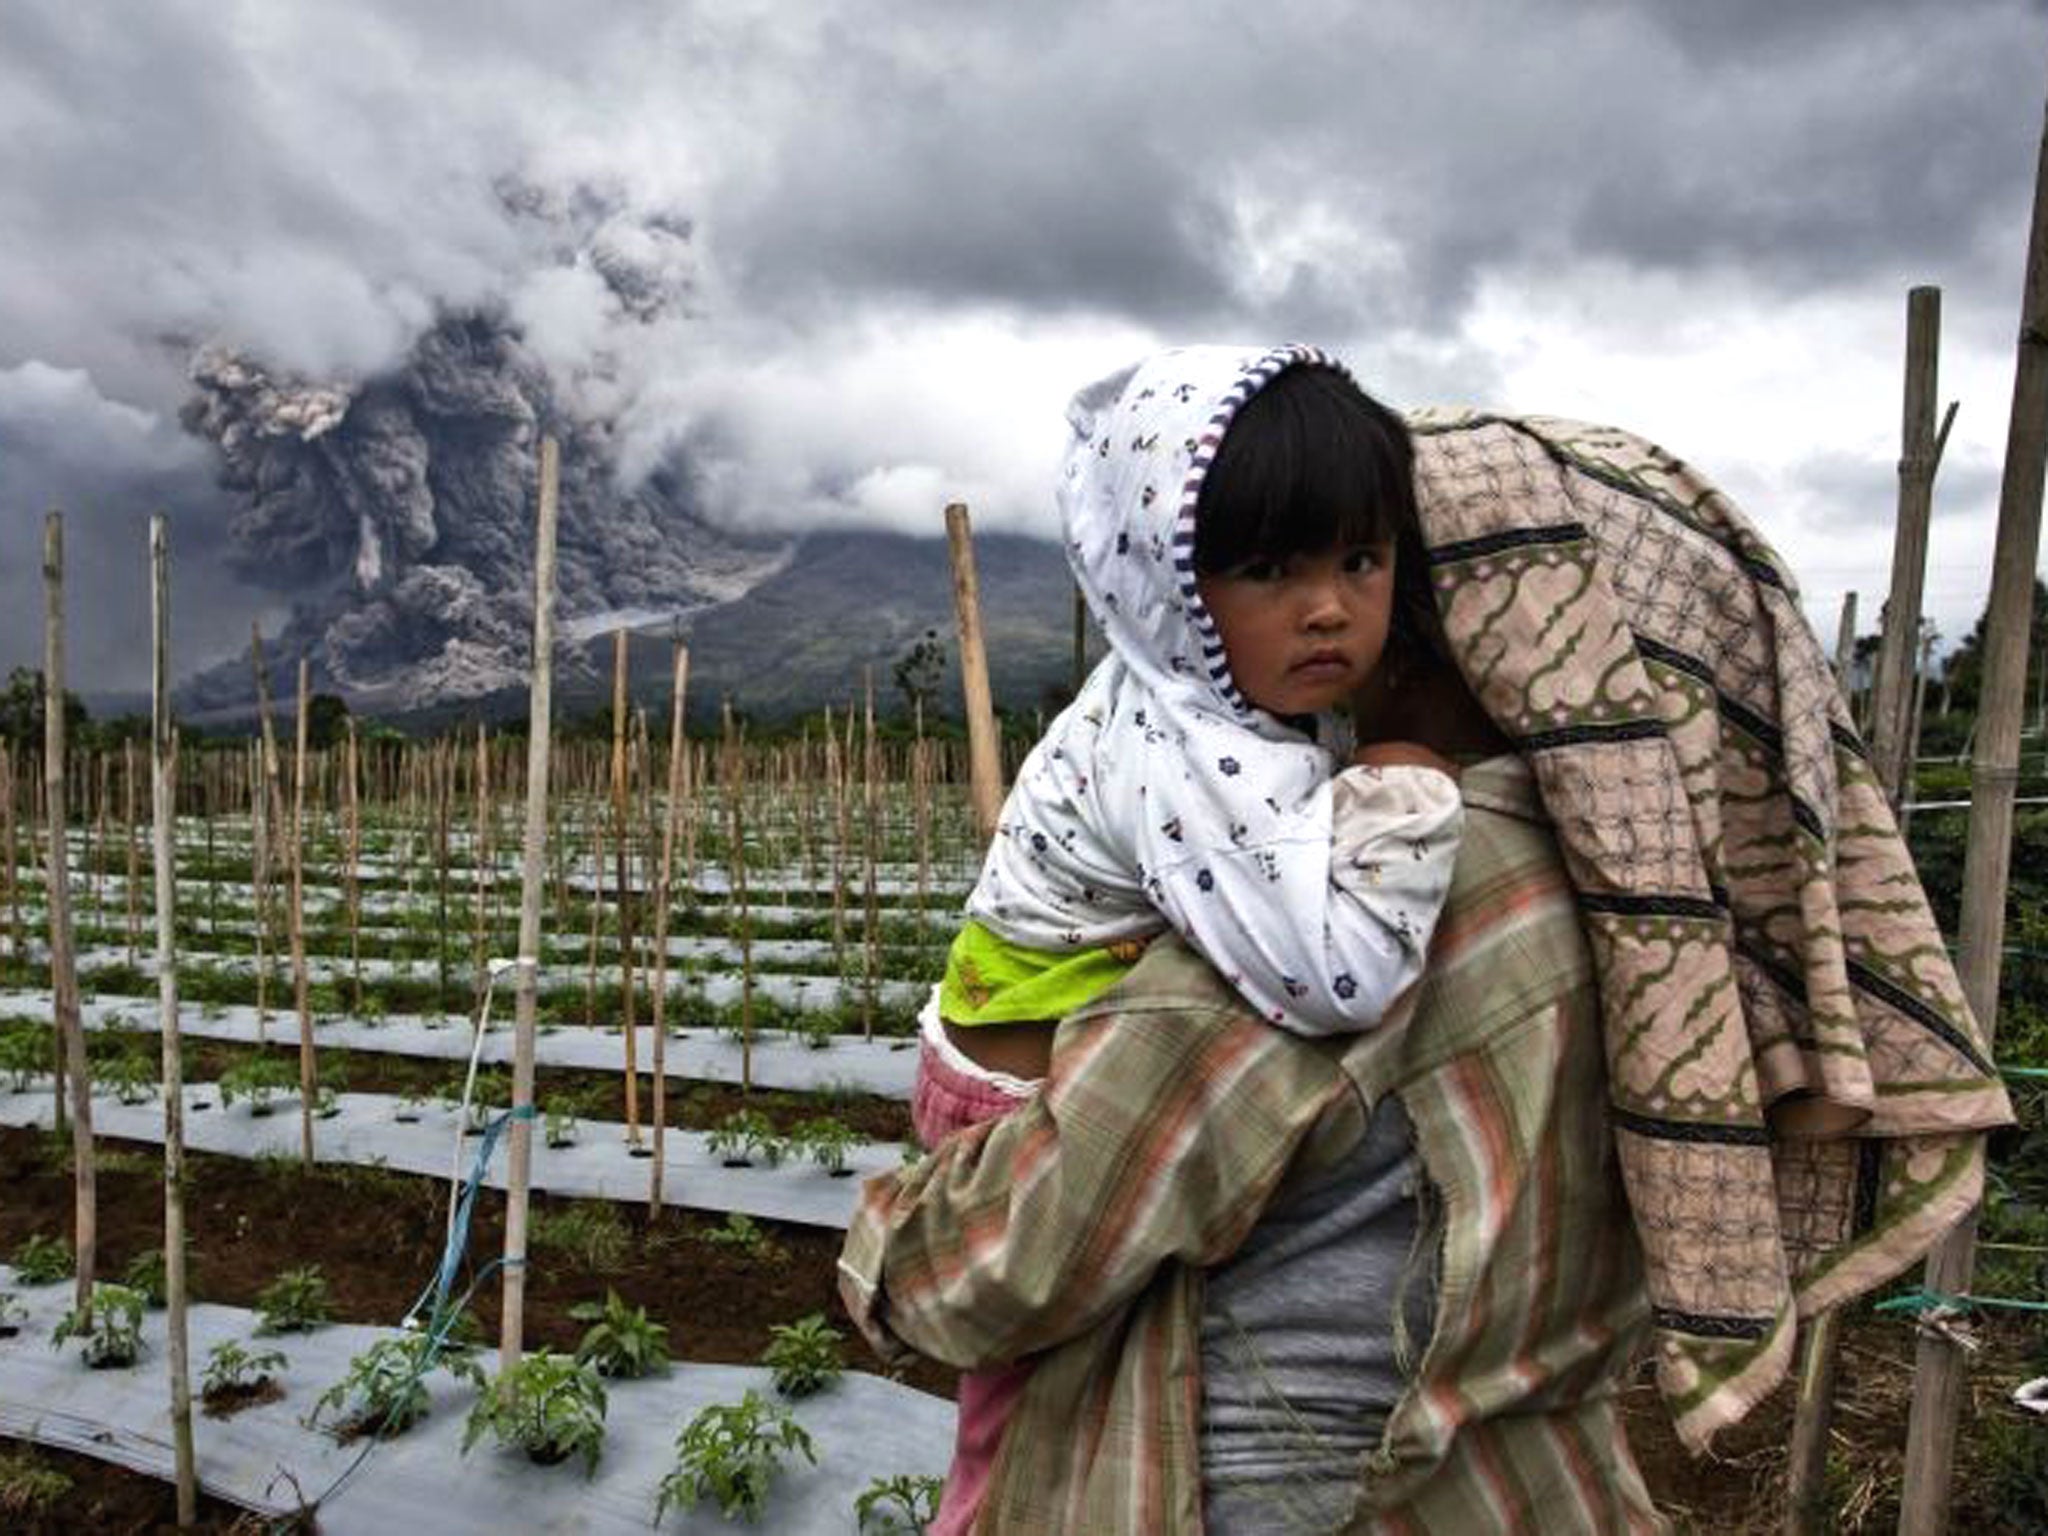 A woman carries her daughter in a nearby field as Mount Sinabung spews pyroclastic smoke in Karo District, North Sumatra